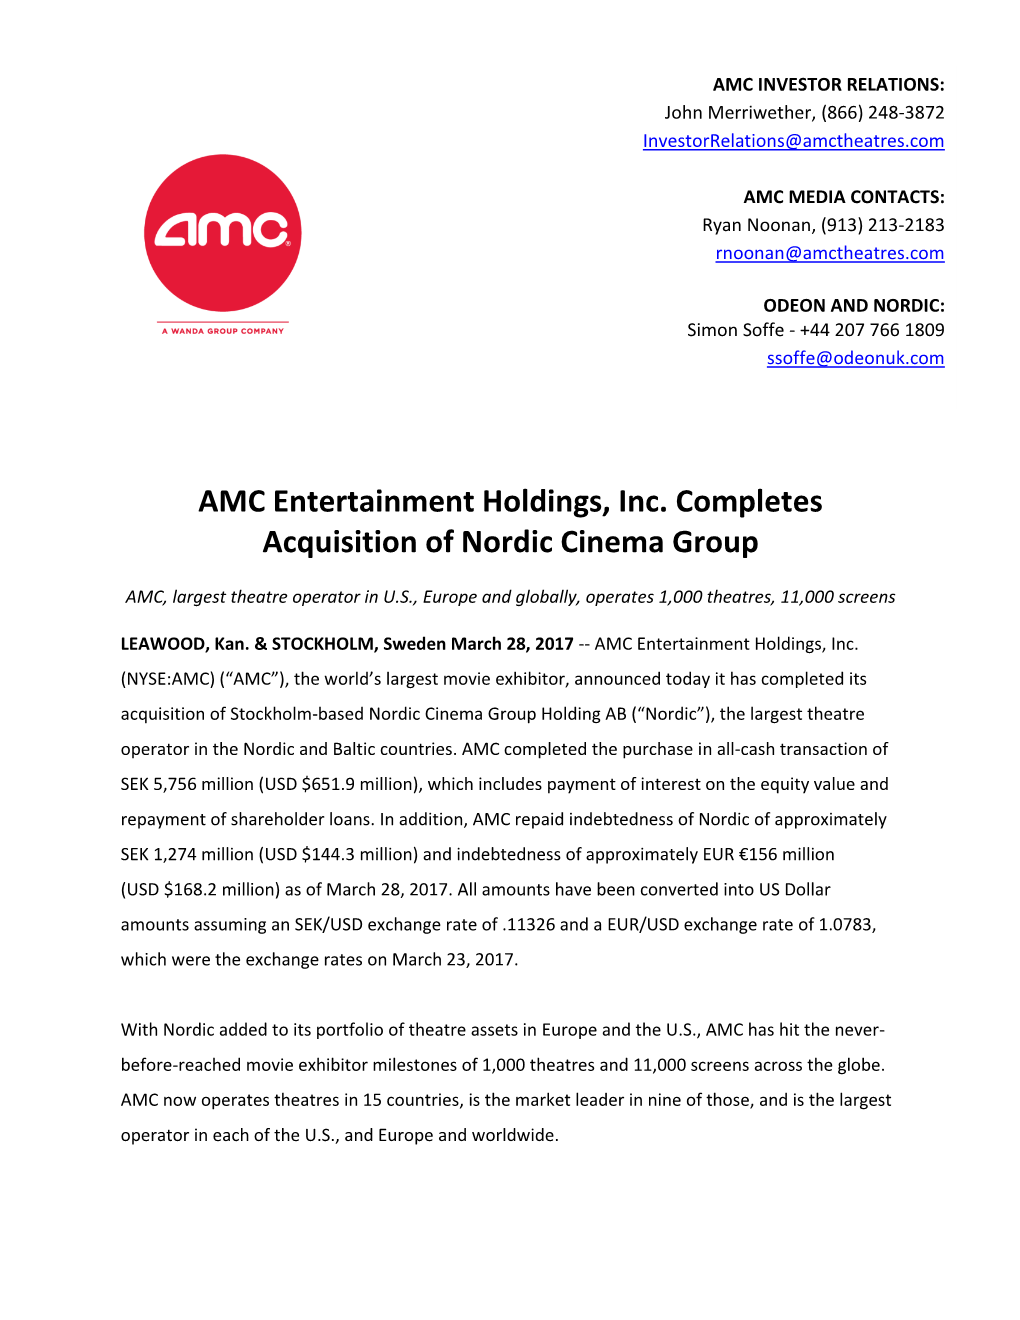 AMC Entertainment Holdings, Inc. Completes Acquisition of Nordic Cinema Group